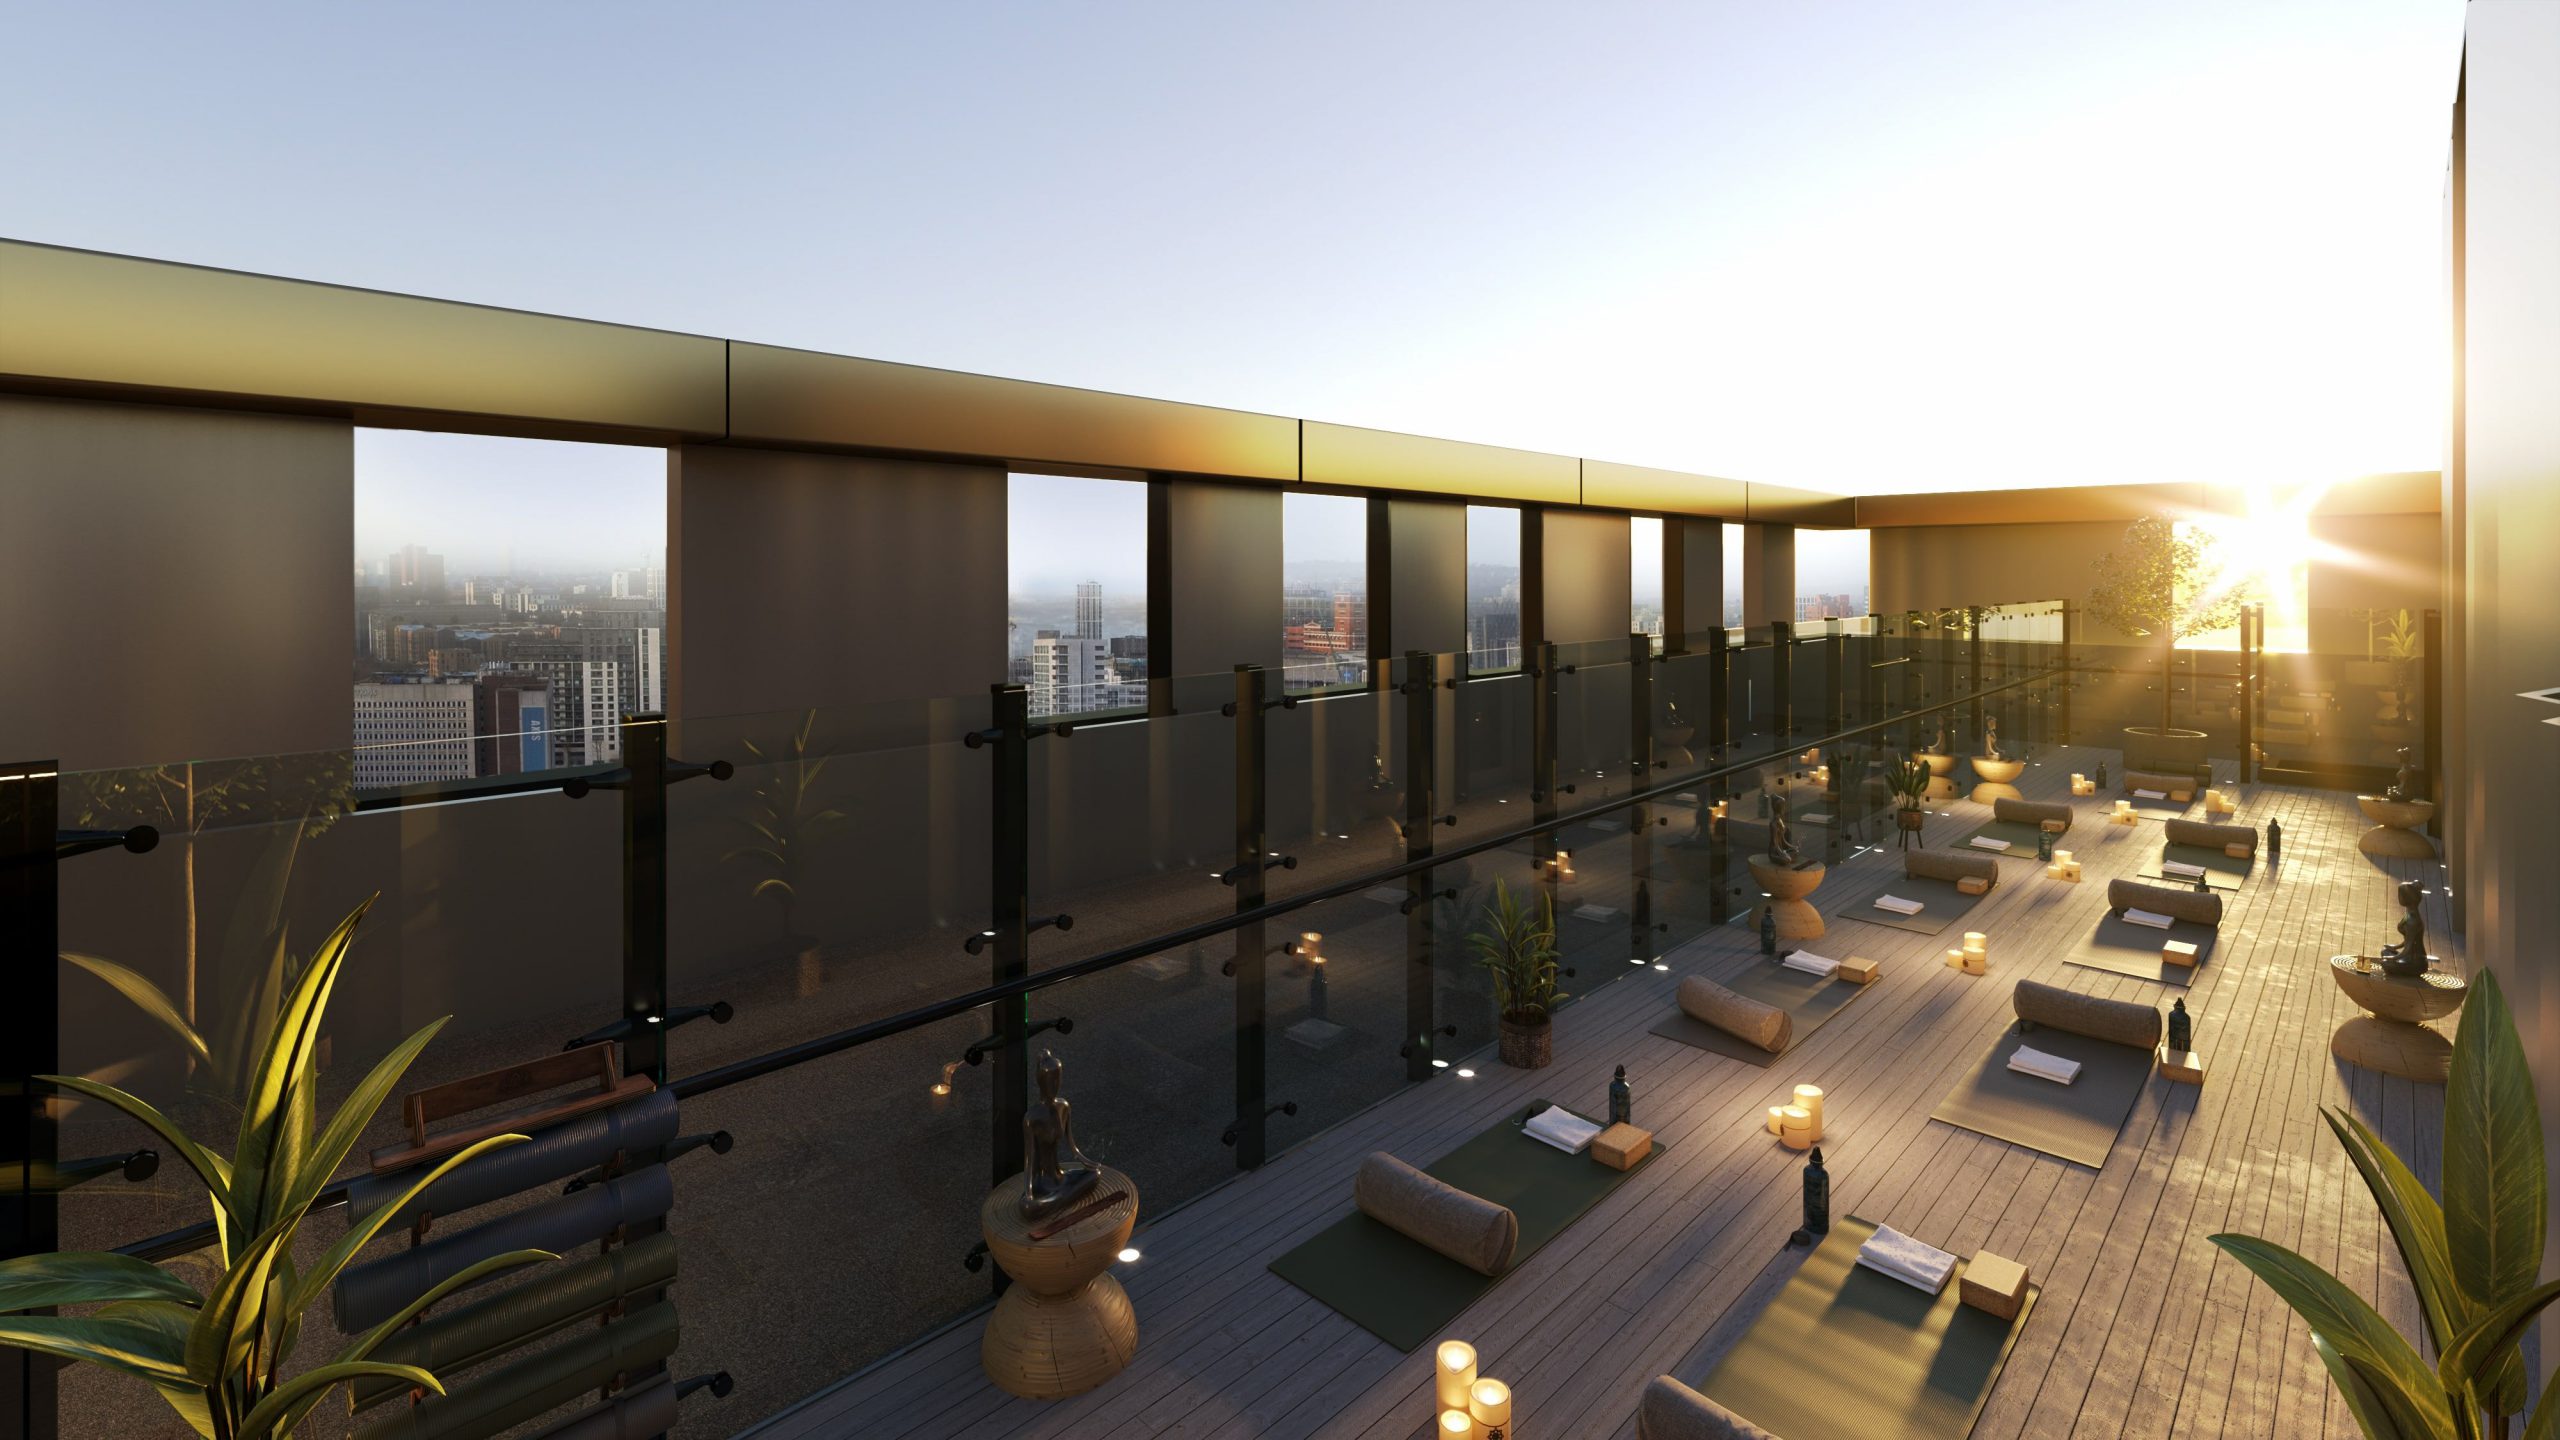 BA_South_Central_birmingham_property_visualisation_Roof terrace morning-min